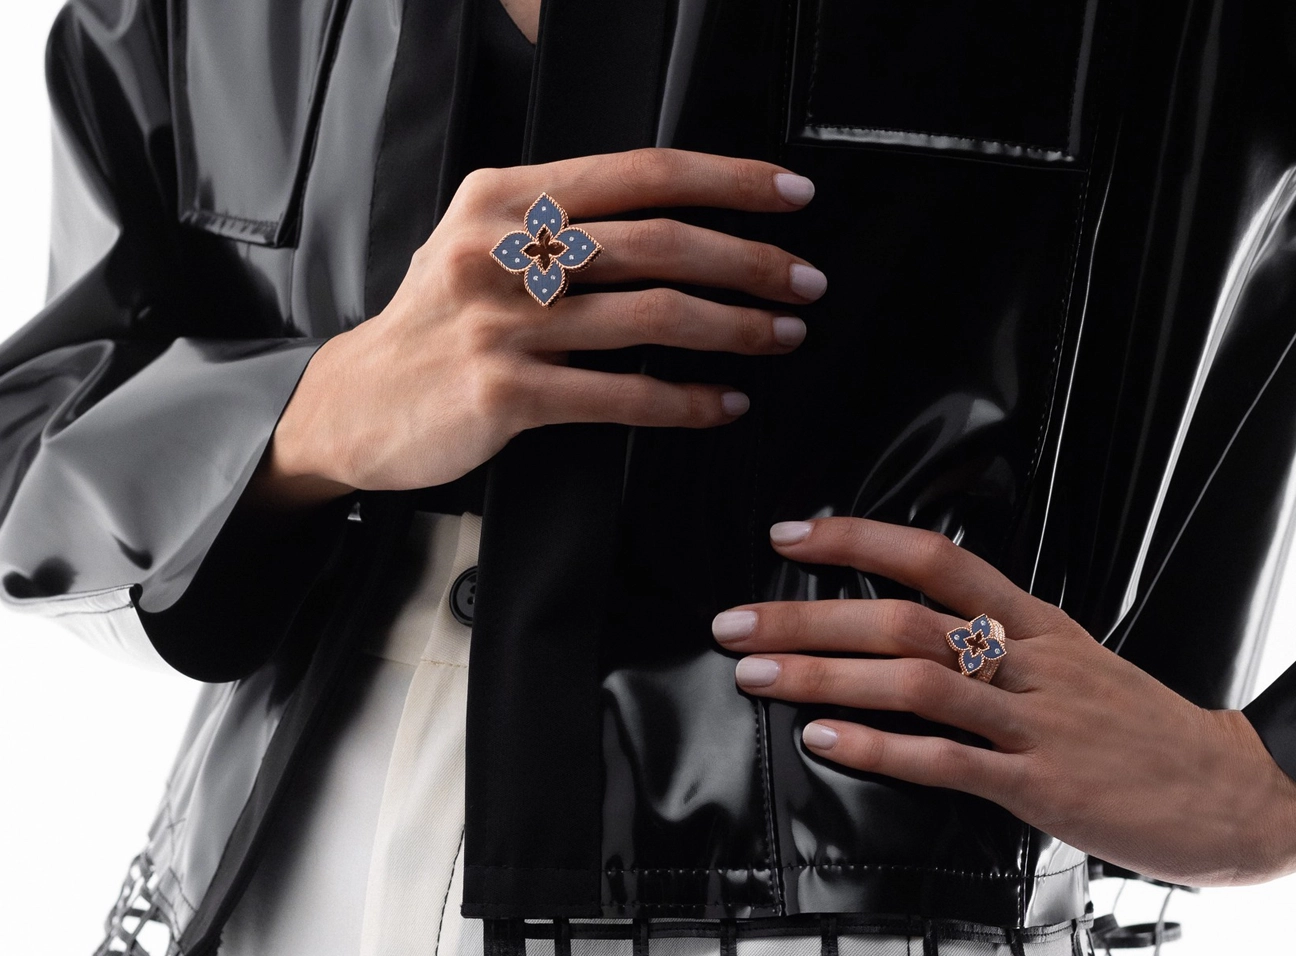 Woman holding back purse with rings on fingers